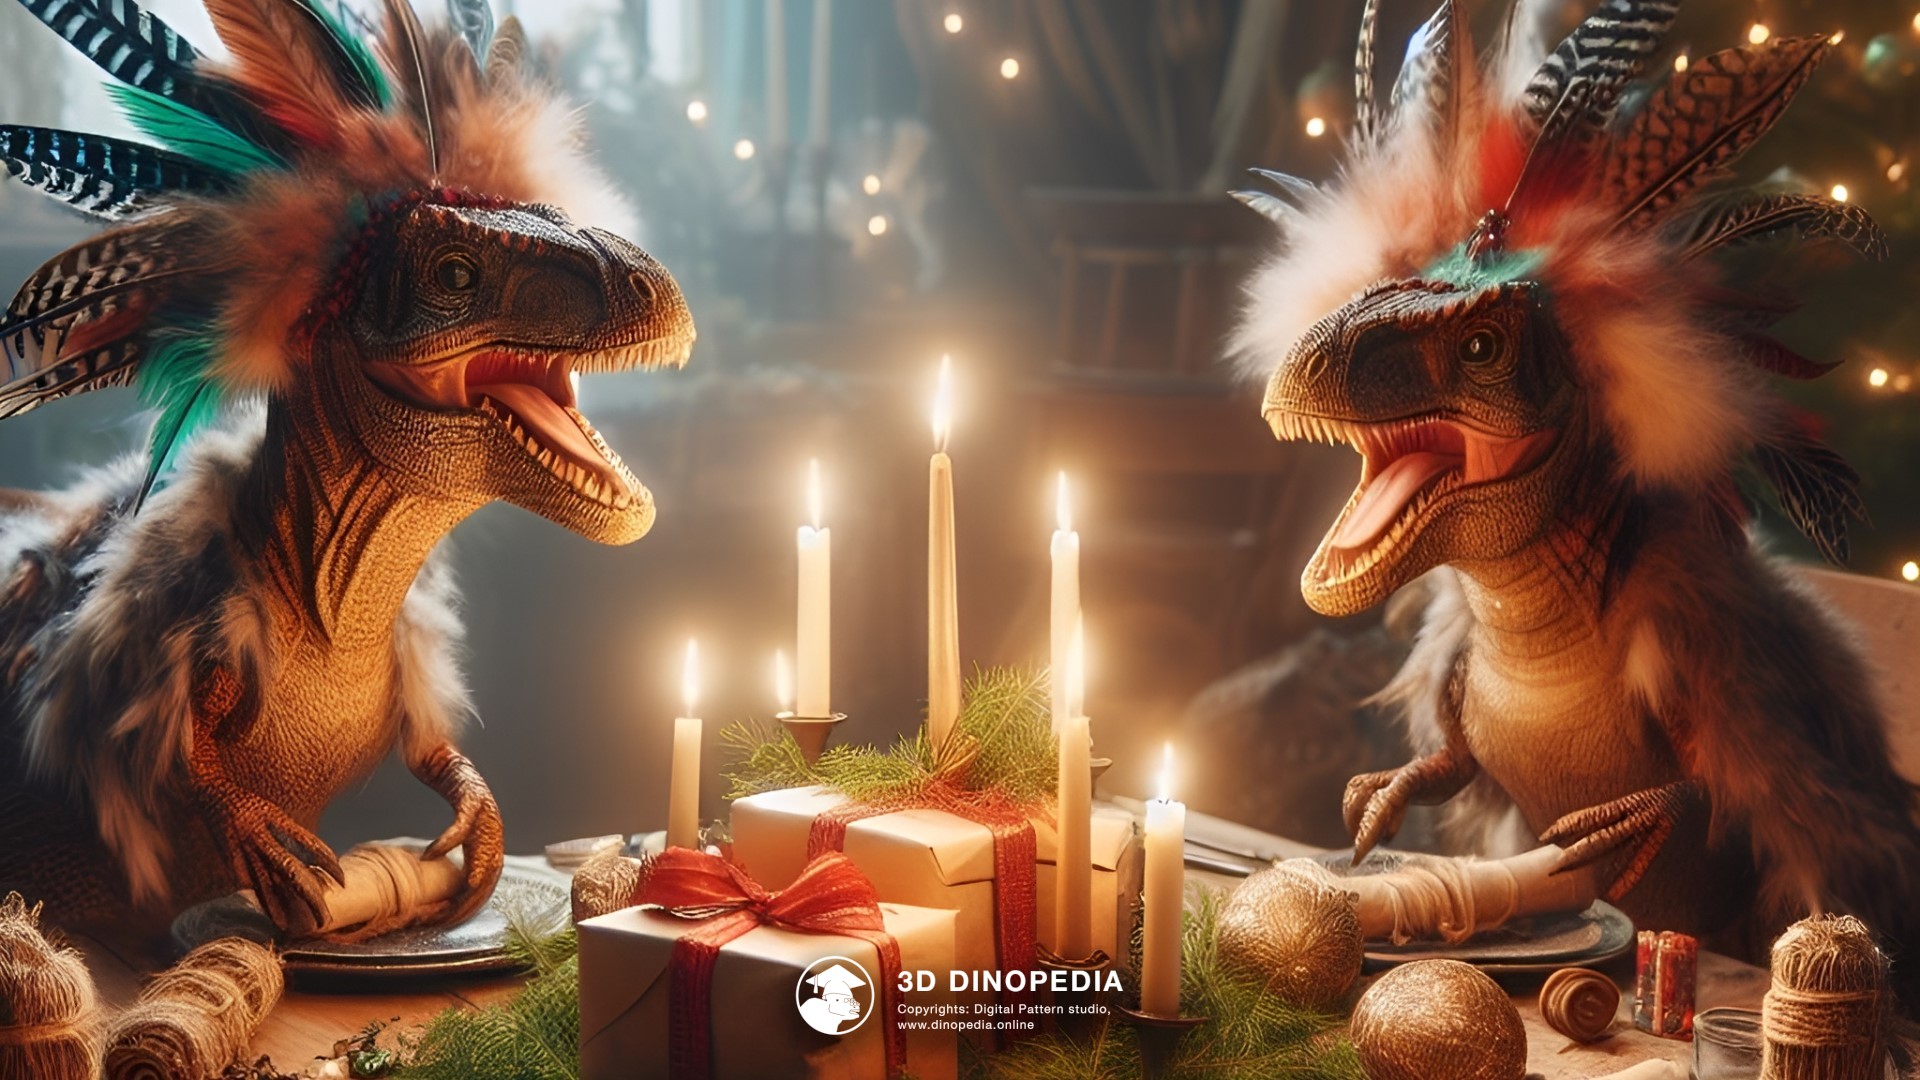 3D Dinopedia The Mysteries of the Christmas Tree - New wallpaper!